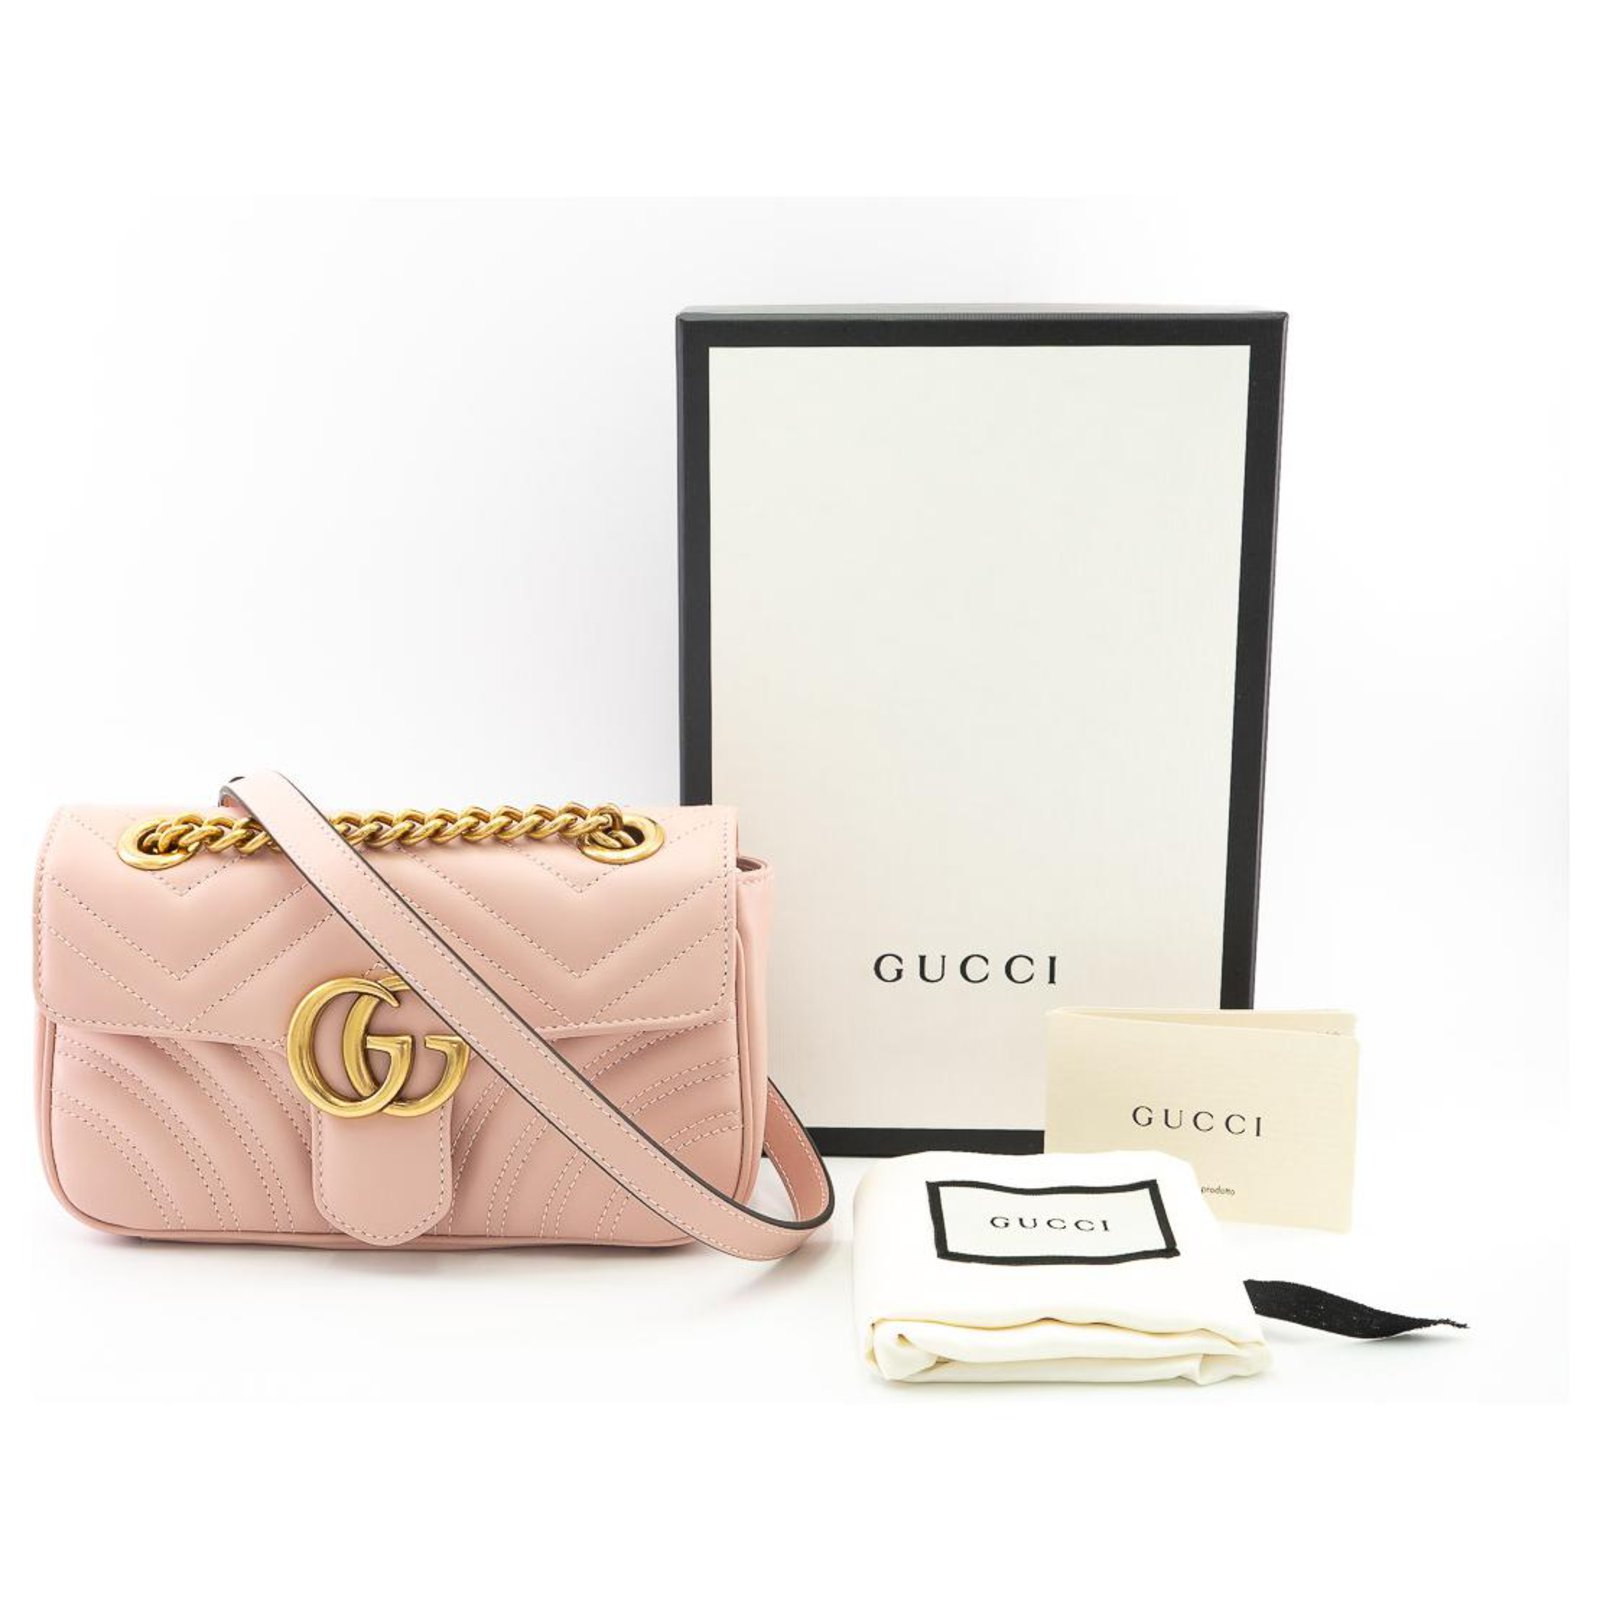 GG Marmont small shoulder bag in light pink leather